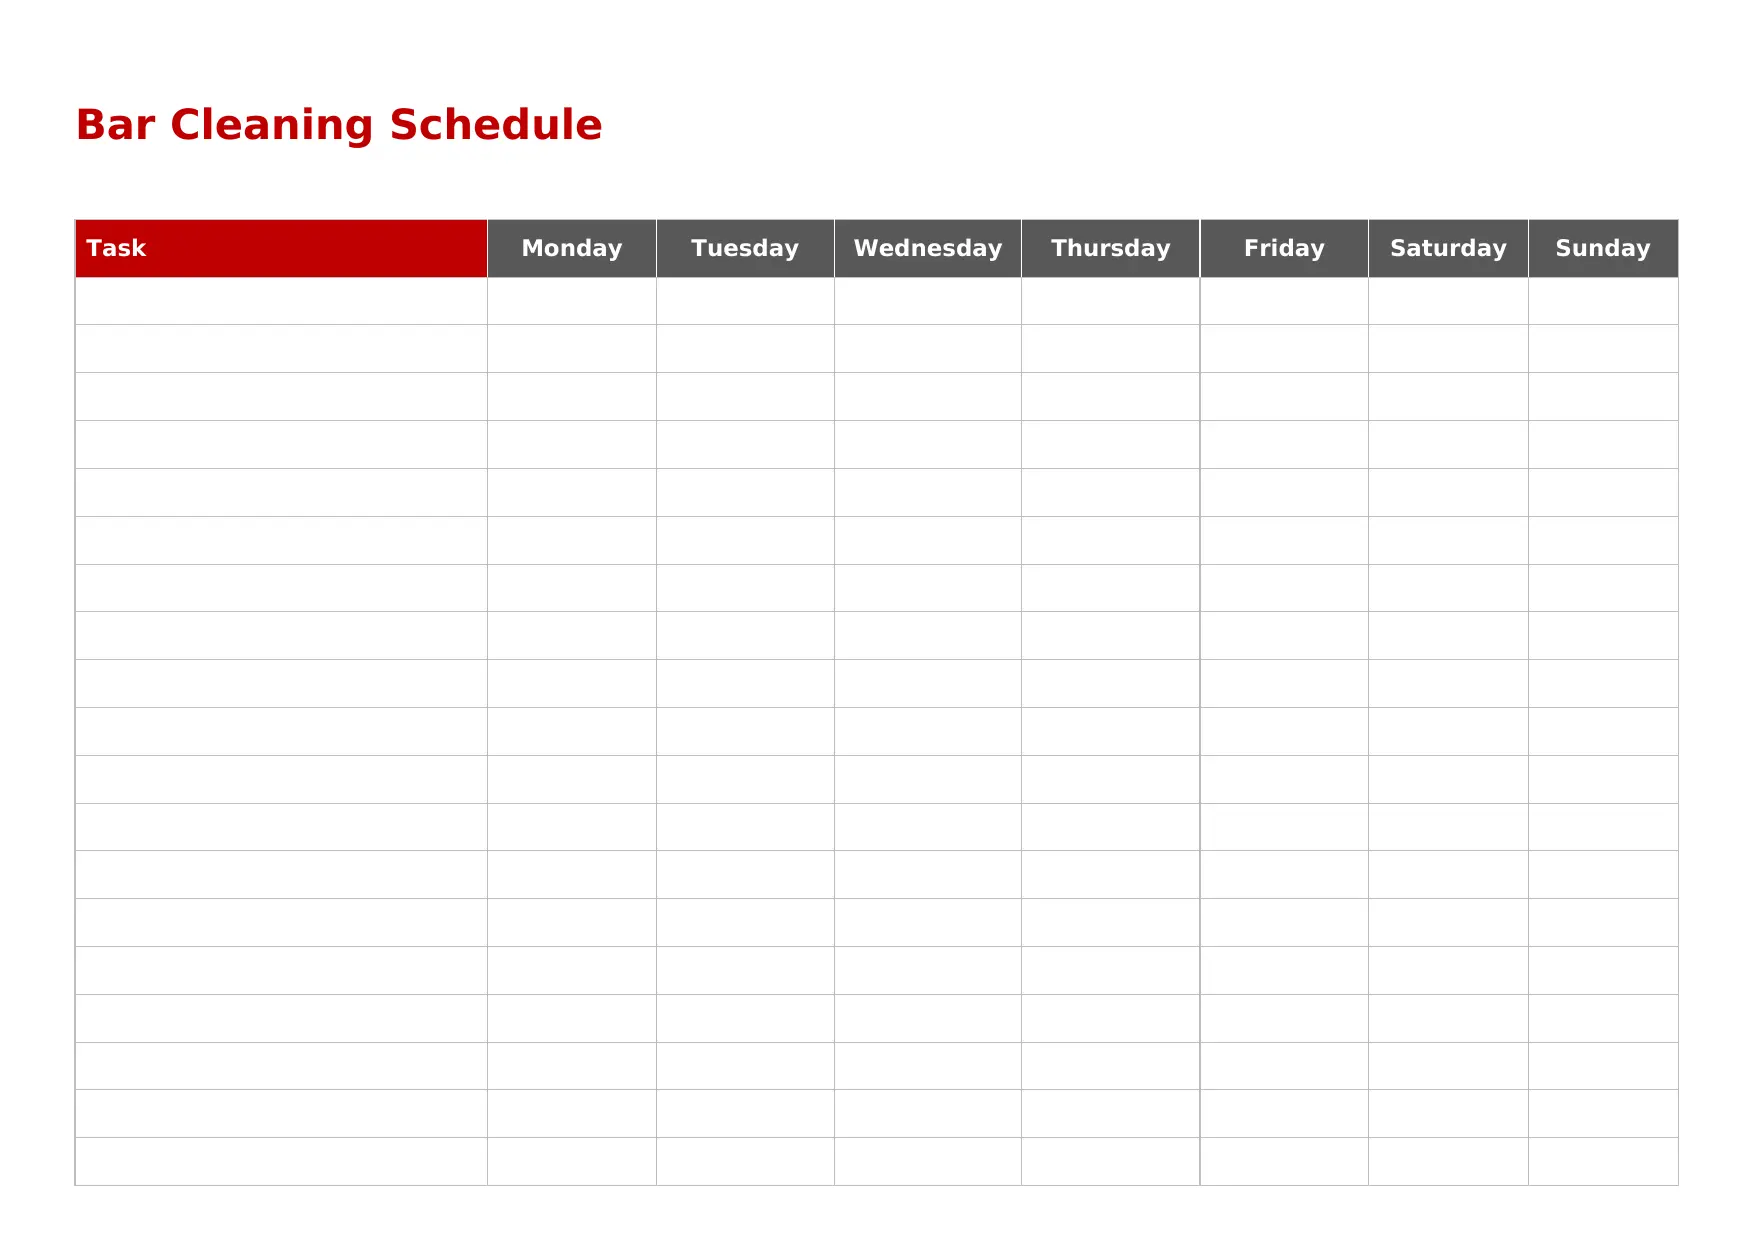 Bar Cleaning Schedule Template, daily Bar Cleaning Schedule Template, bar cleaning schedule examples